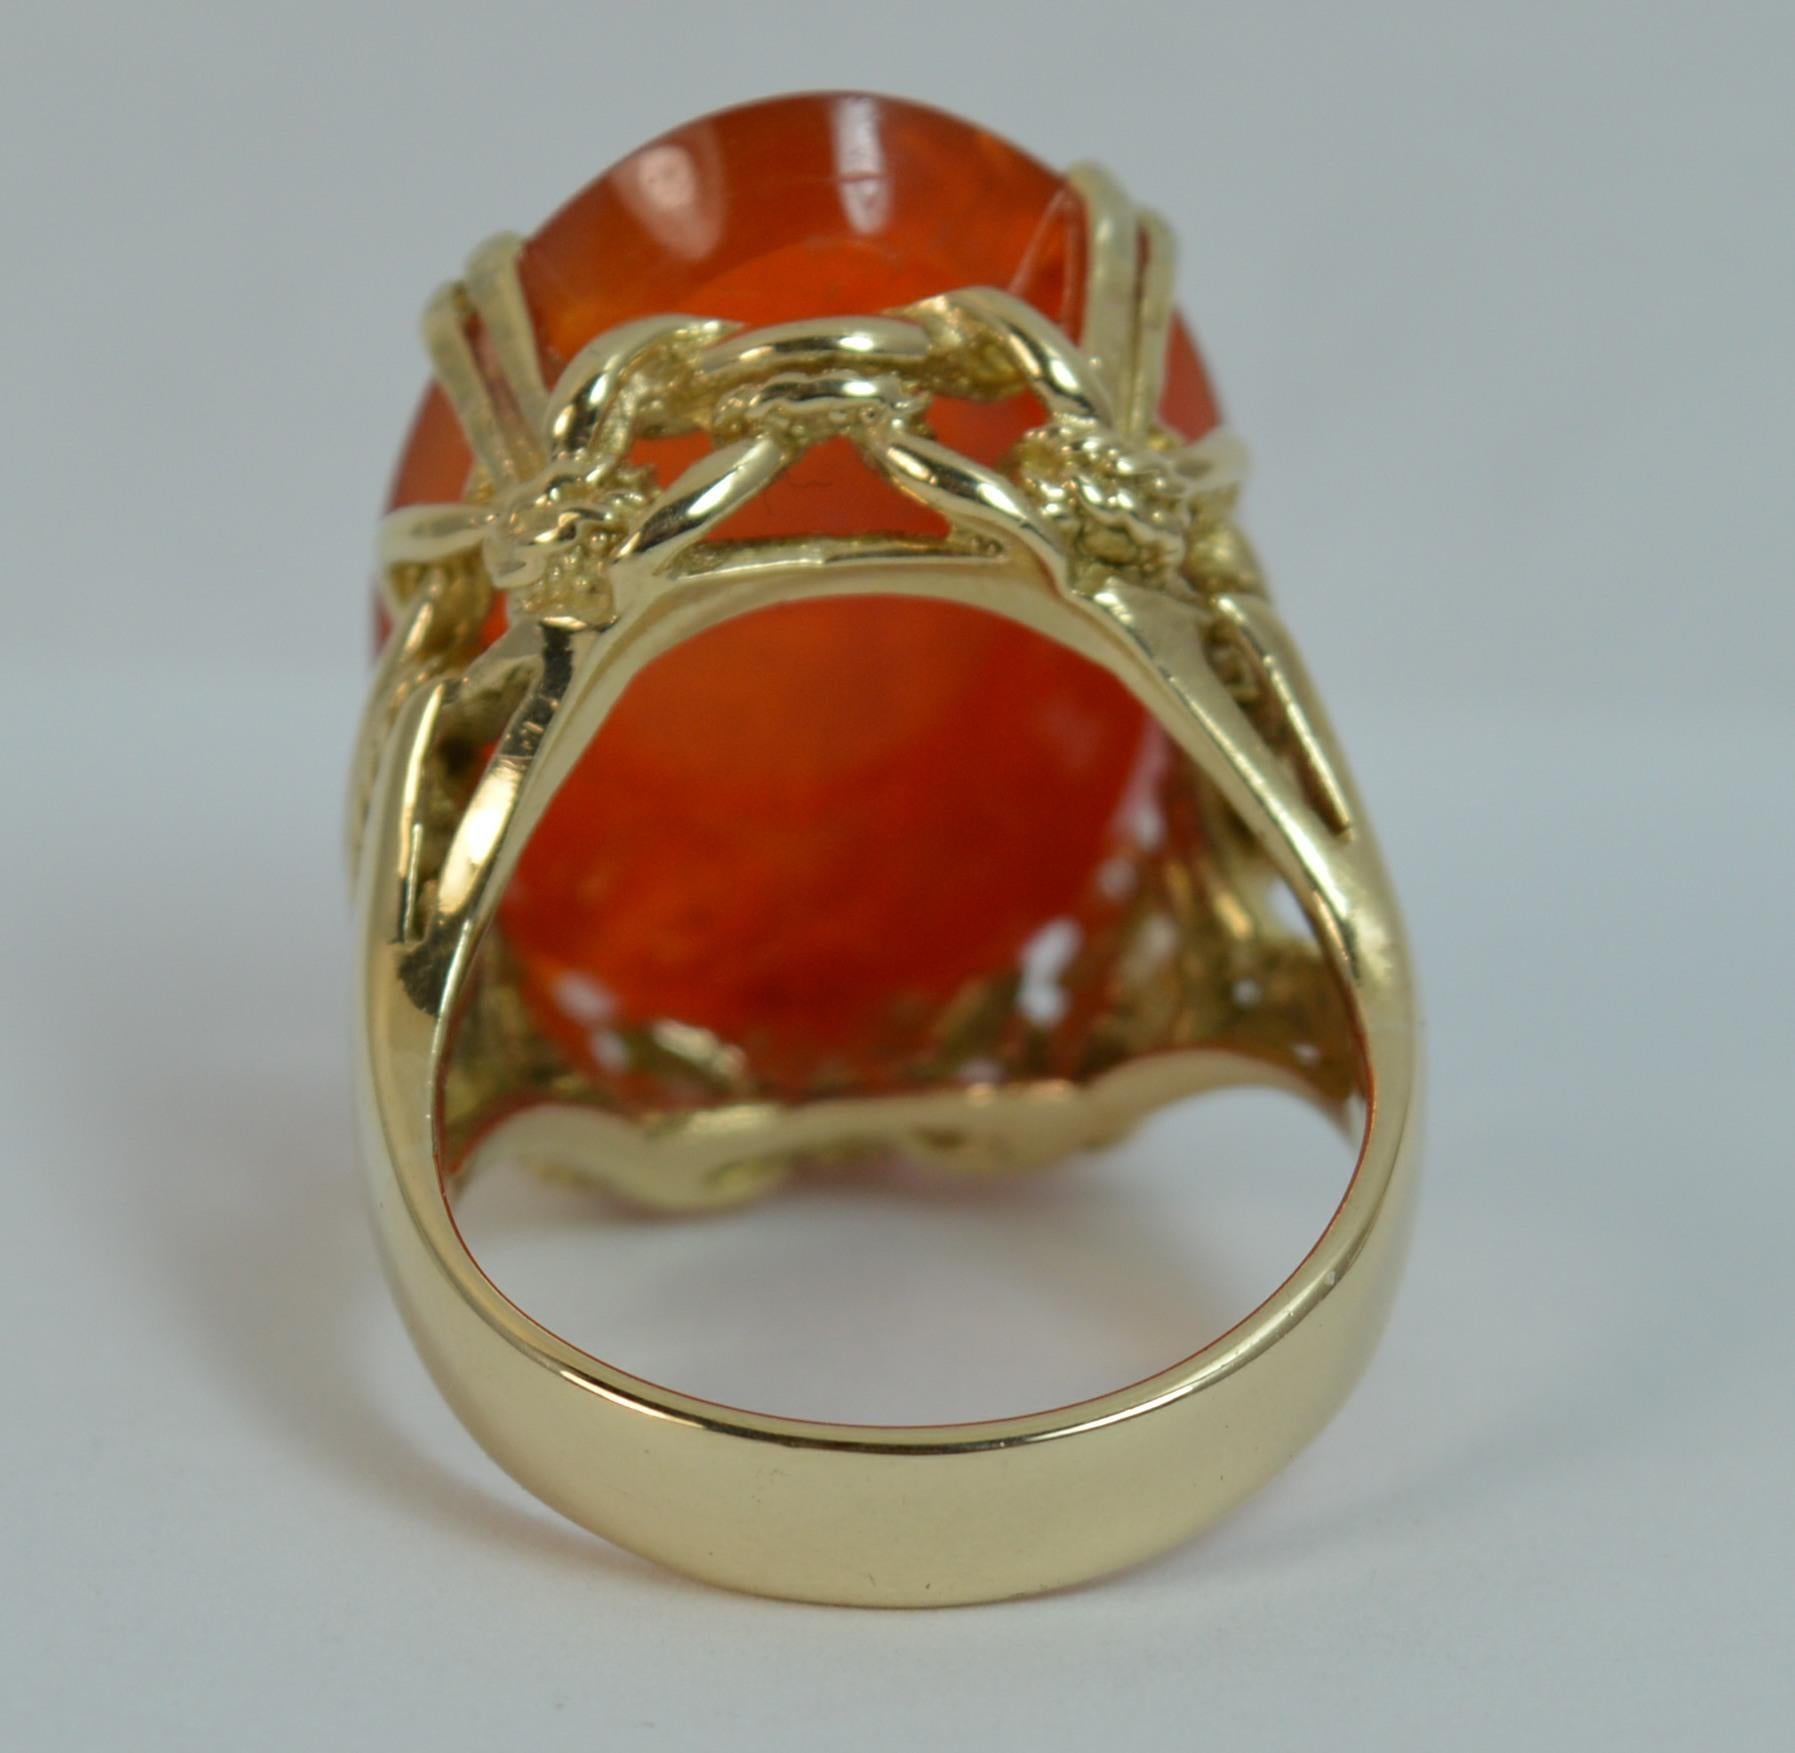 Large Wild Boar Head Carnelian Agate and 9 Carat Gold Intaglio Seal Signet Ring 3